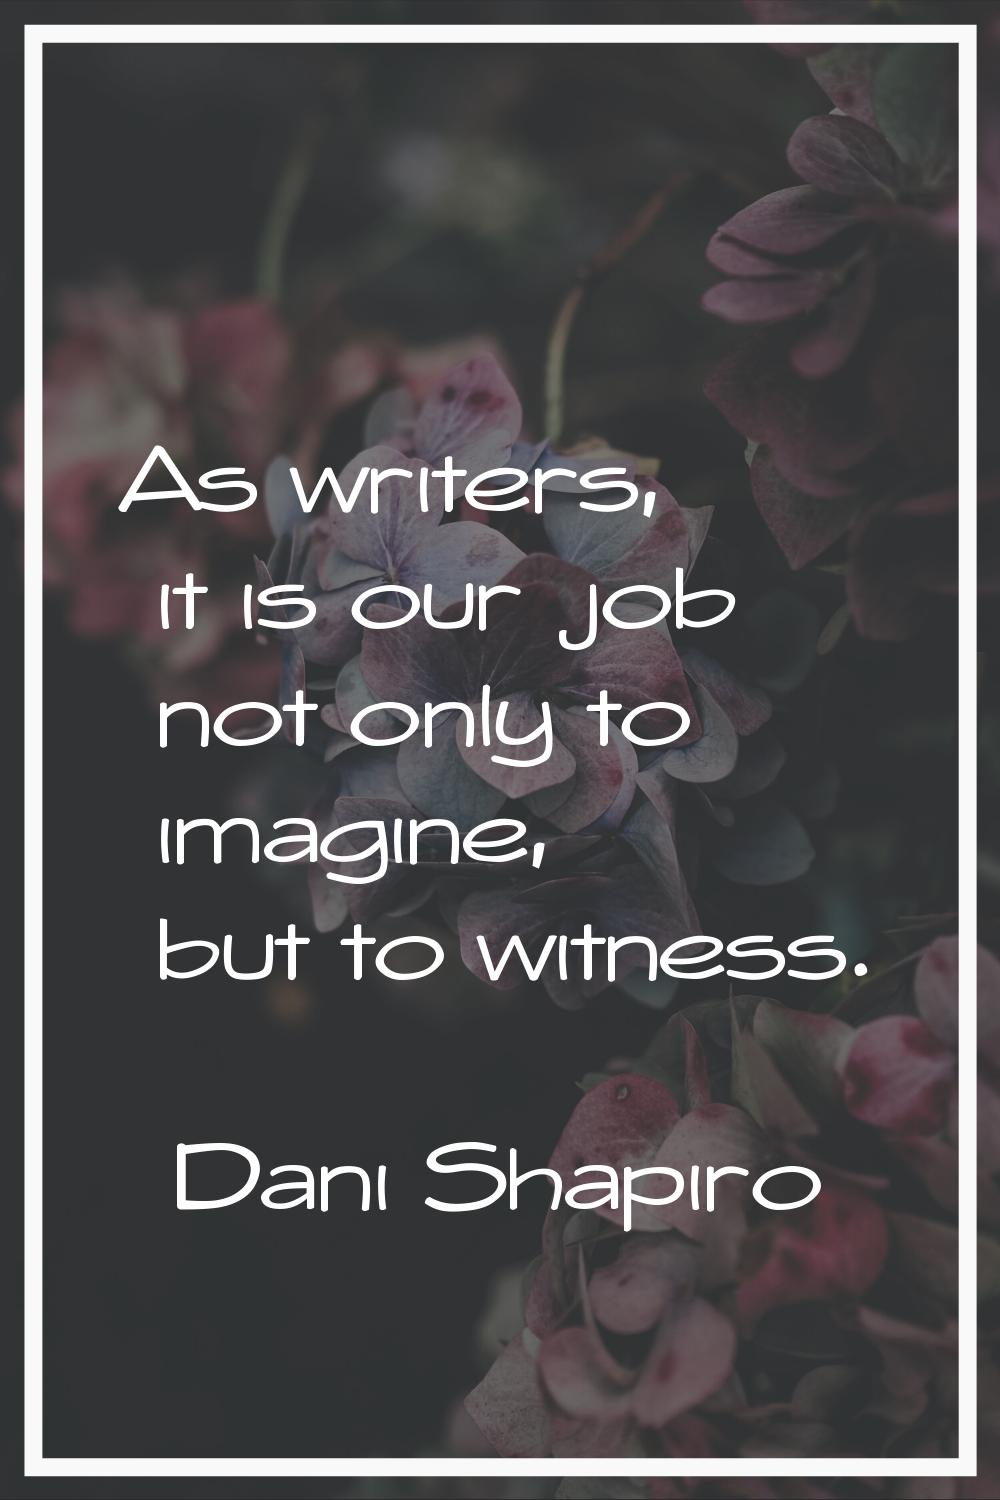 As writers, it is our job not only to imagine, but to witness.